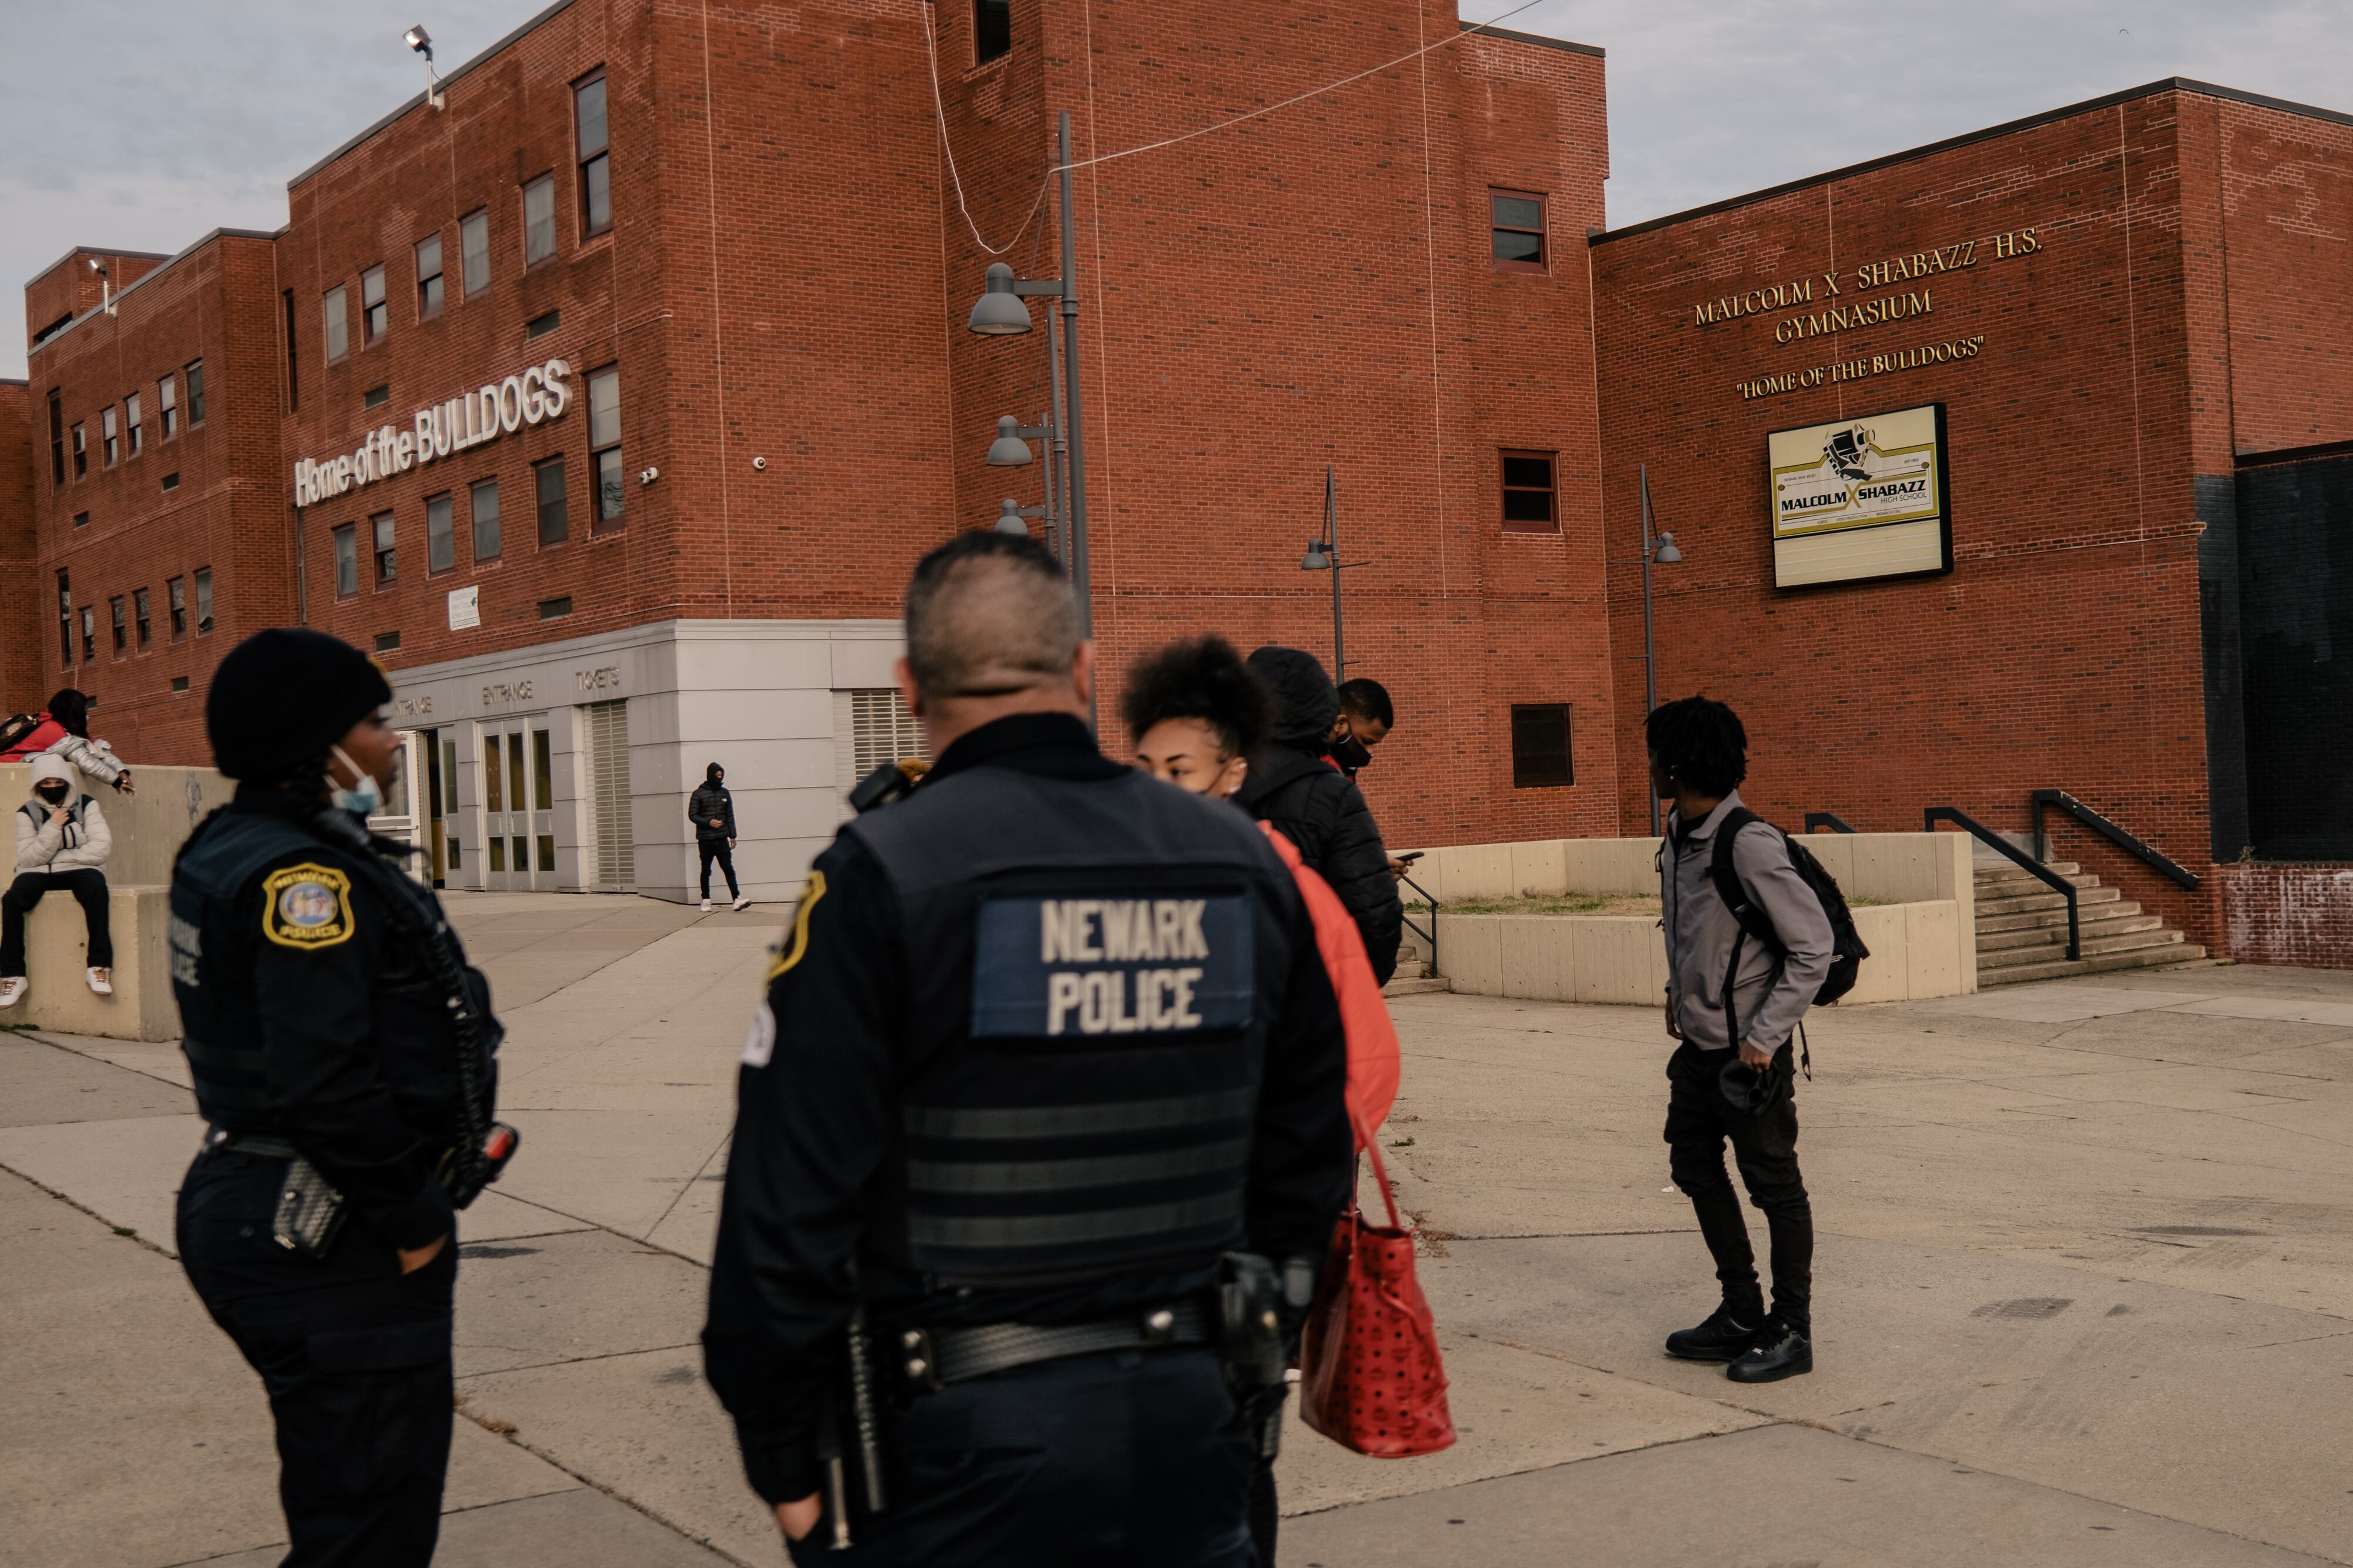 Members of the Newark Police department speak with a student outside of a large red-brick school front after dismissal, as other students wait outside of the school.